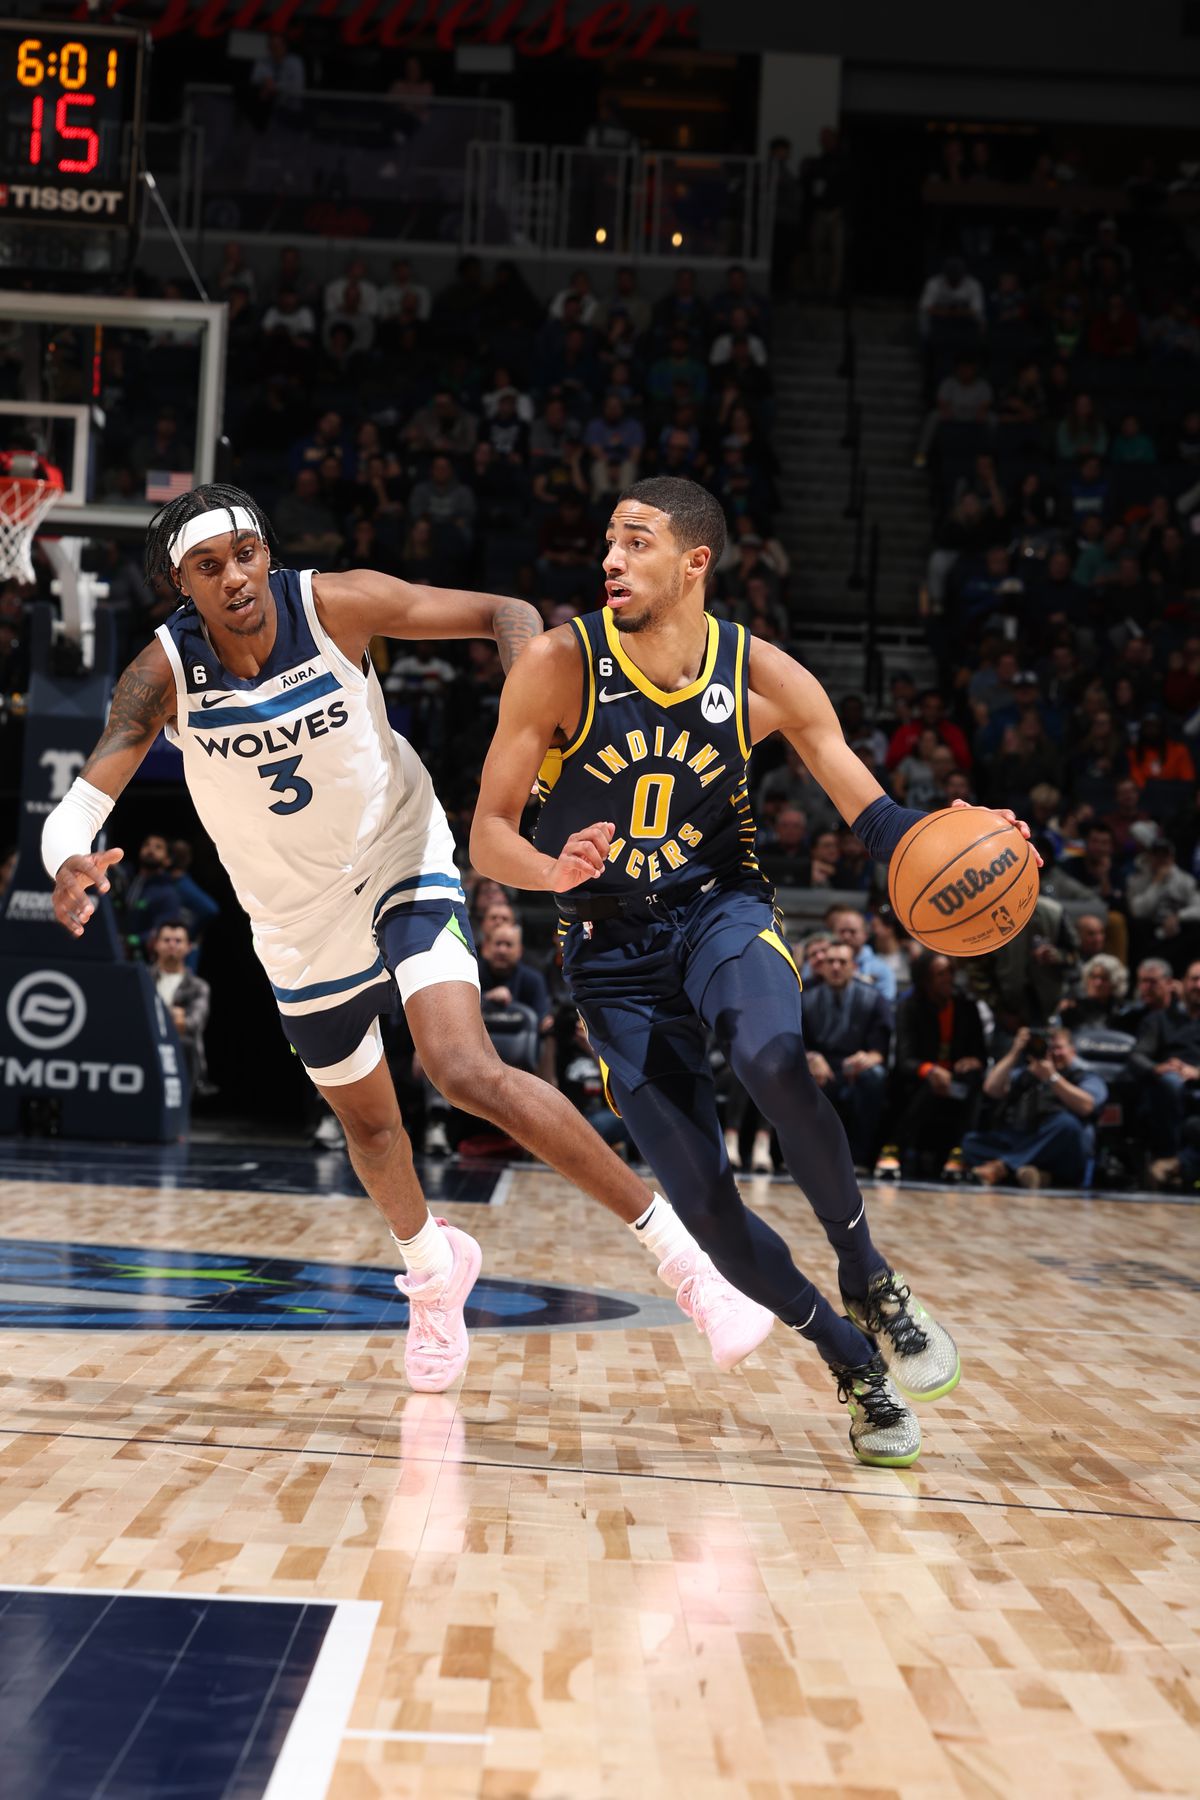 Indiana Pacers v Minnesota Timberwolves